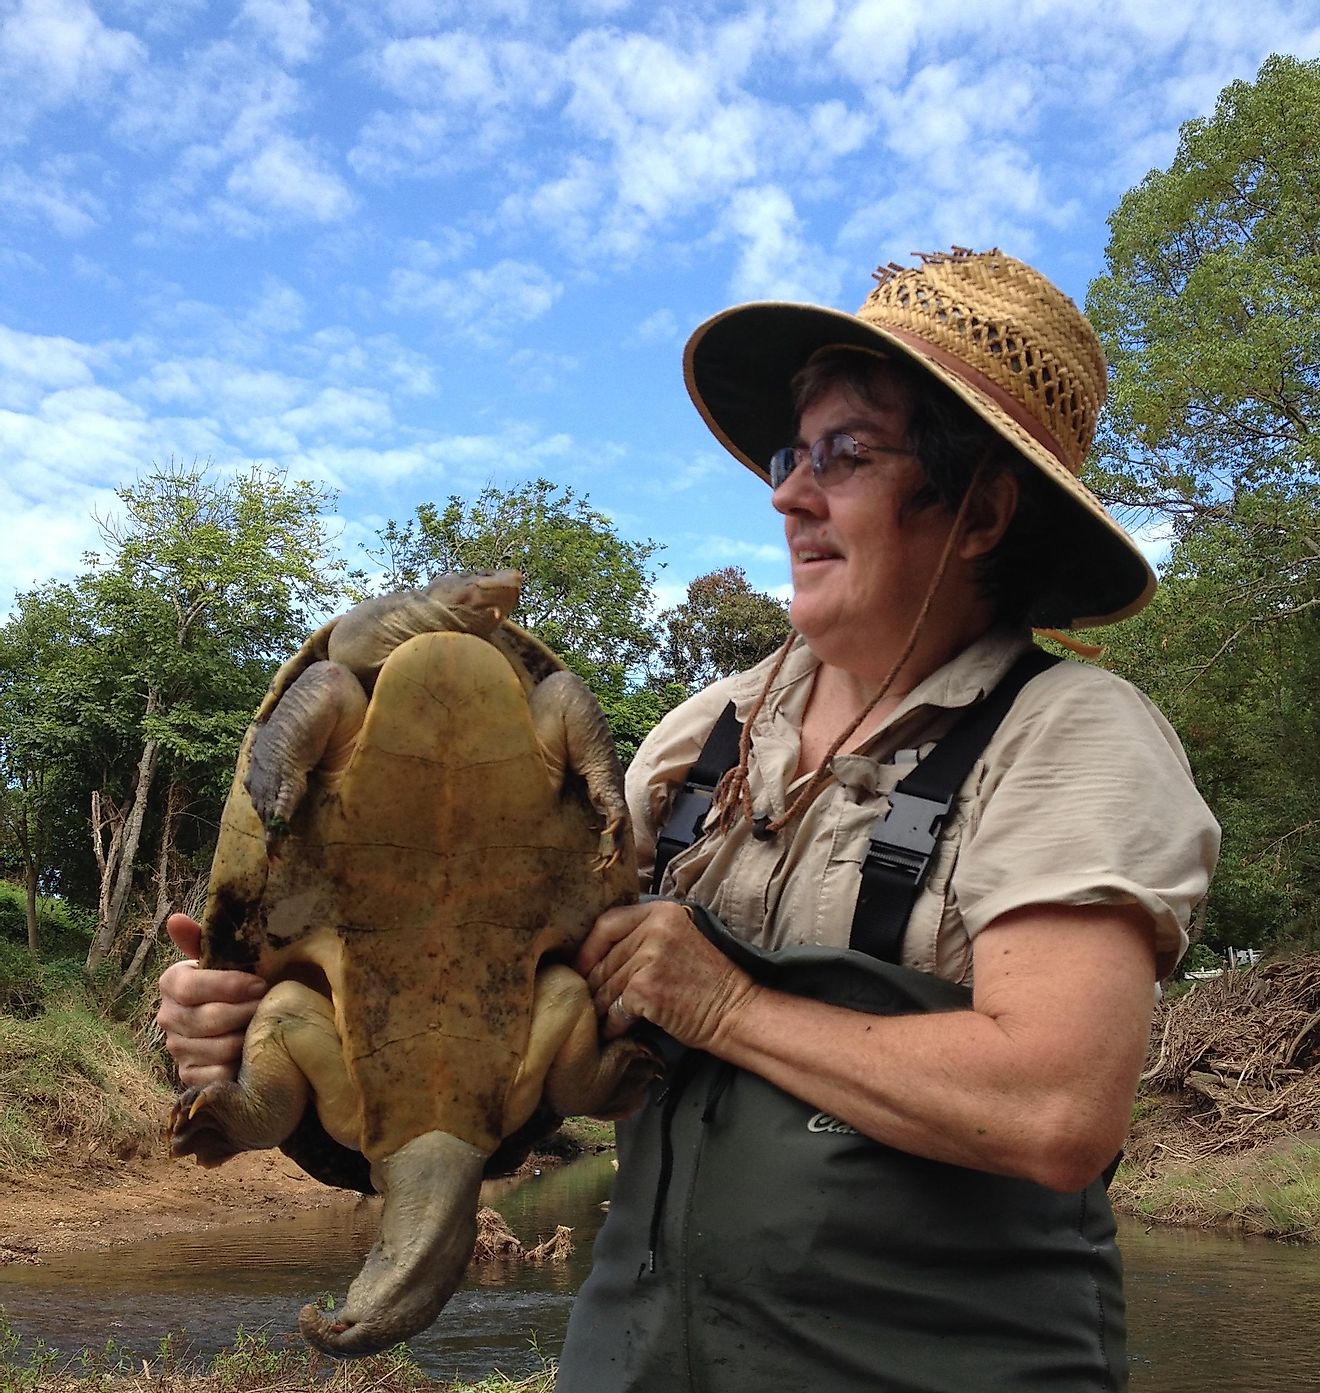 Marilyn Connell, team leader of the Mary River Turtle Conservation Program in Queensland, Australia, holding the endangered Mary River turtle, a species that she is striving hard to protect.